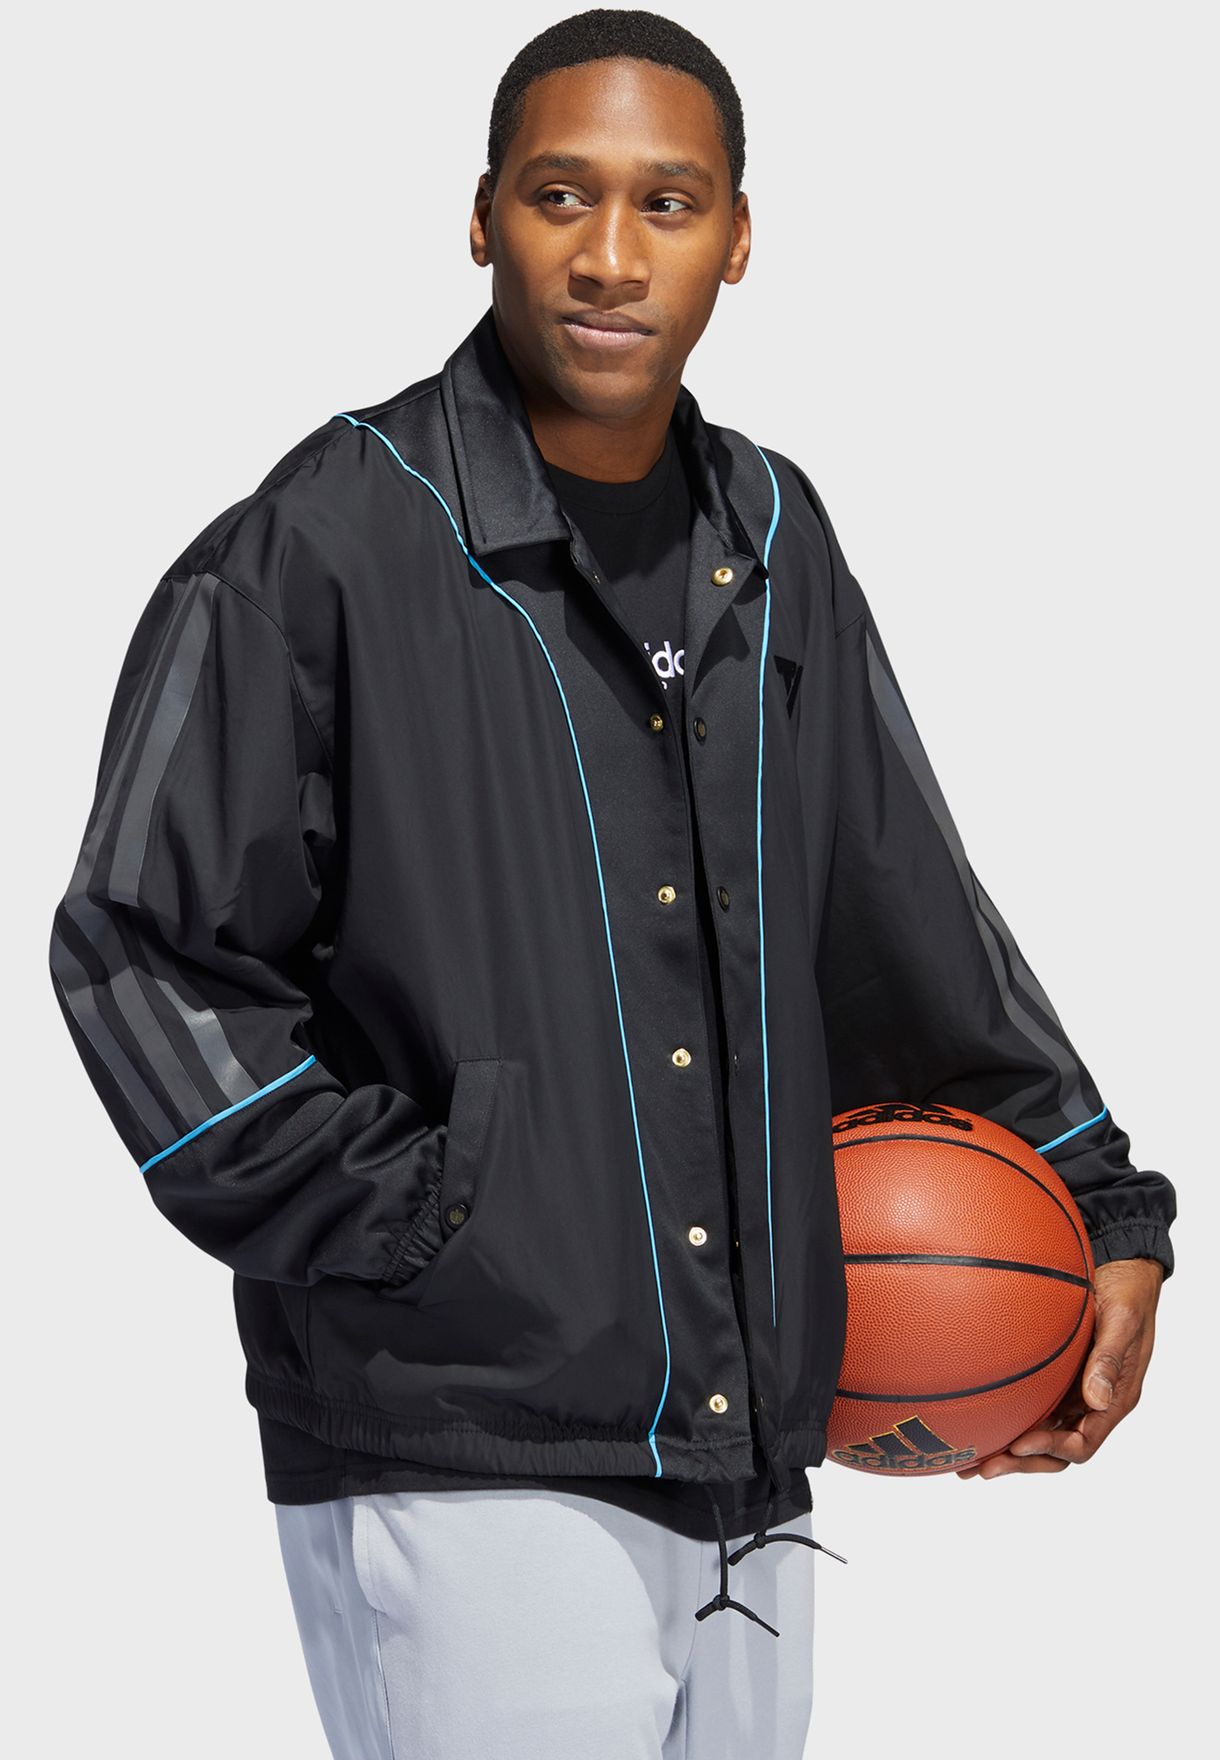 Trae Young Jacket